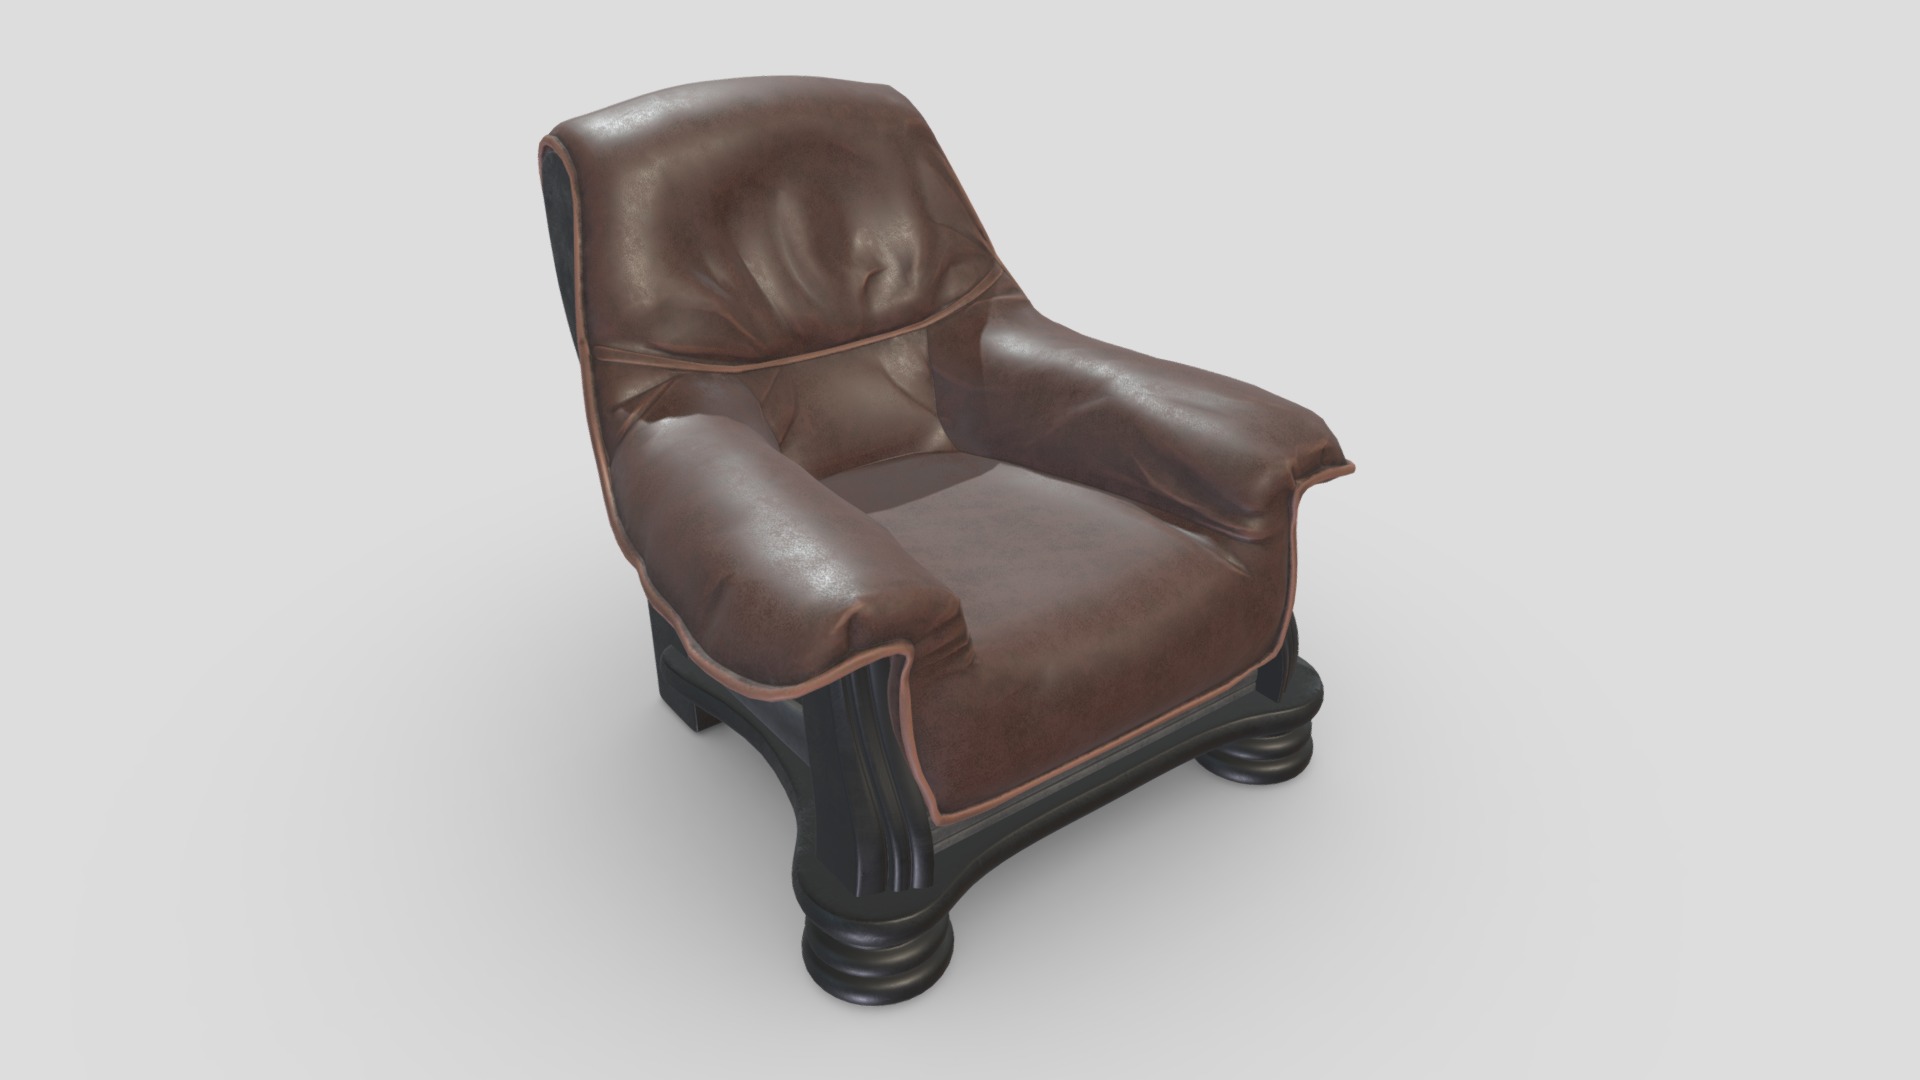 3D model Arm Chair 05 - This is a 3D model of the Arm Chair 05. The 3D model is about a leather chair with a white background.